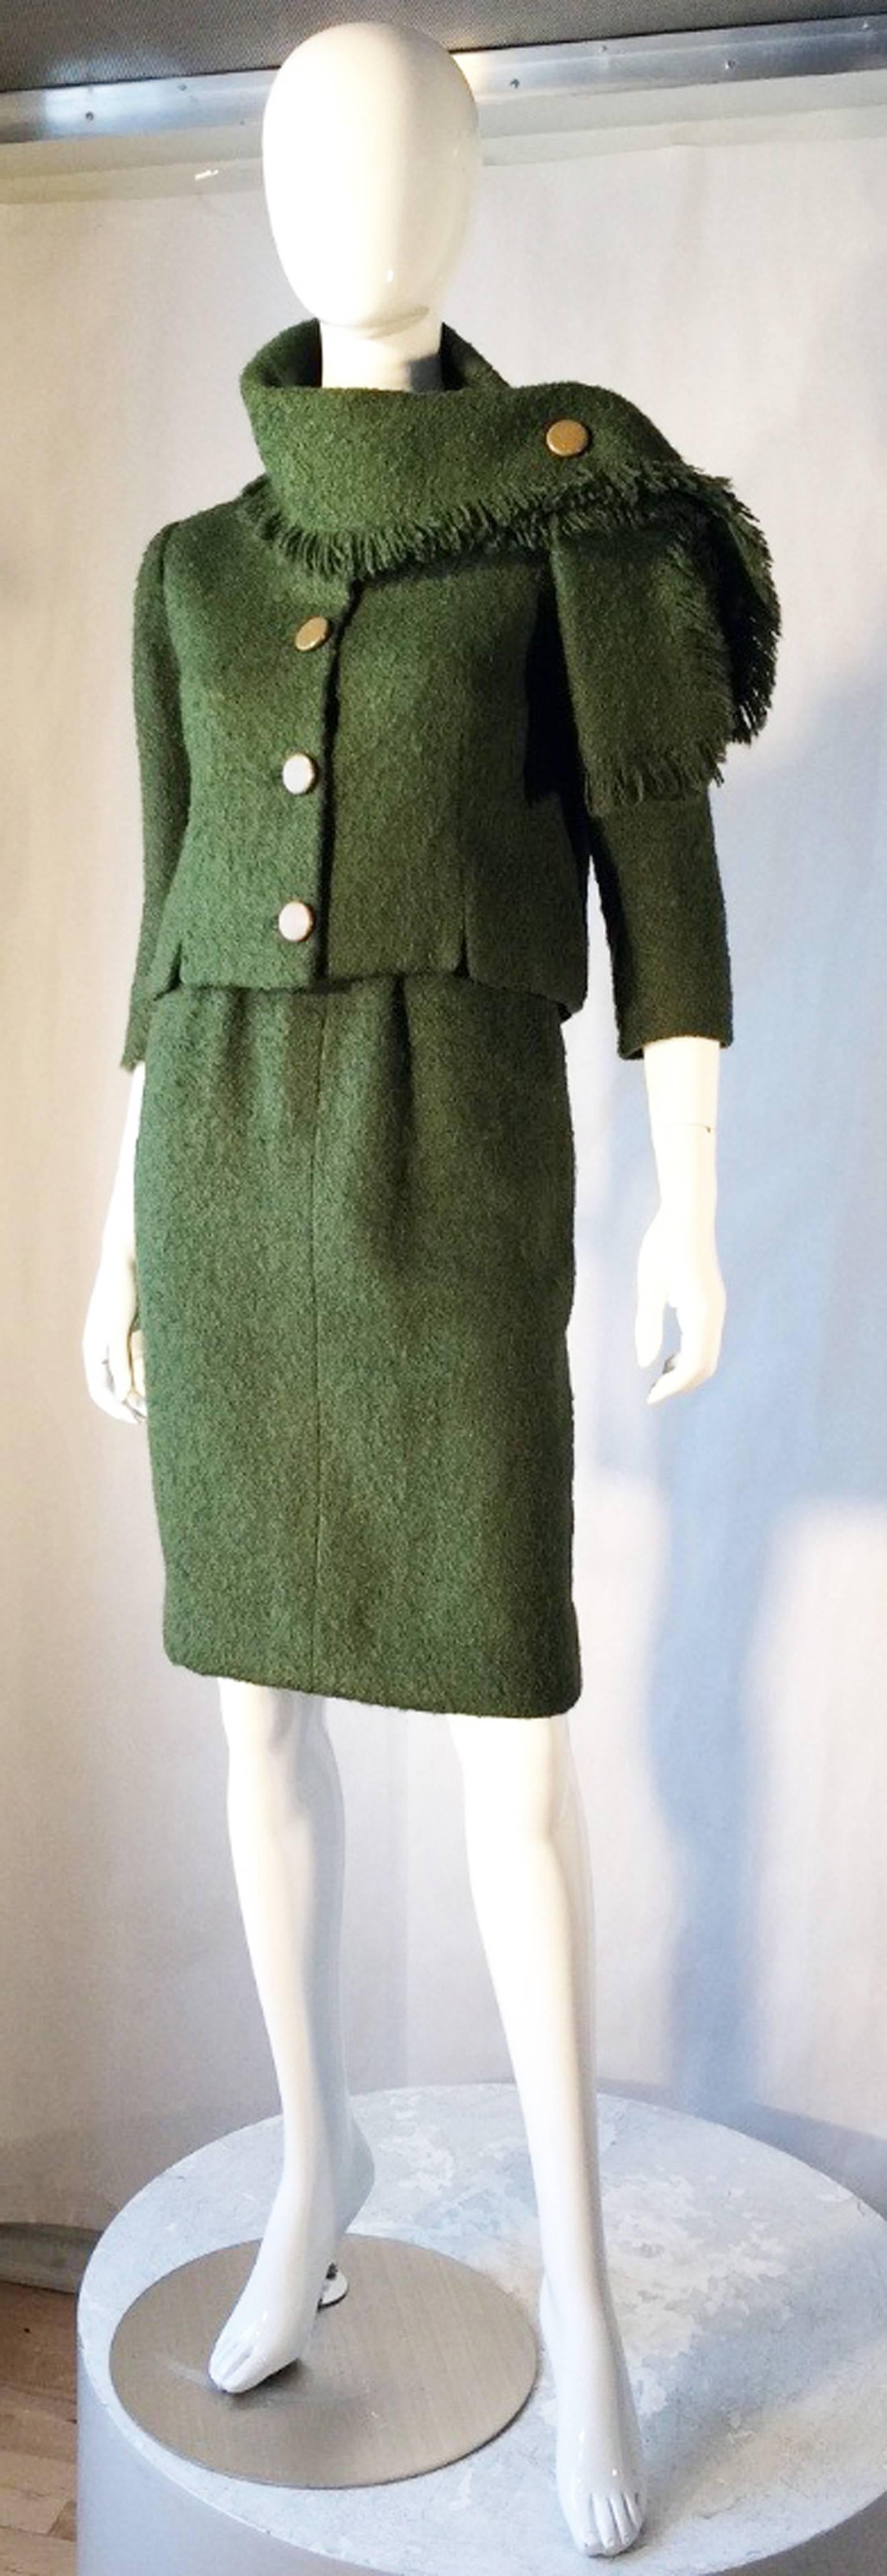 A fine and rare vintage Balenciaga haute couture skirt suit ensemble. Authentic numbered and documented item retains original hand written Balenciaga order receipt dated 1957. A wonderful shade of green 2pc. wool frise fabric items feature precision